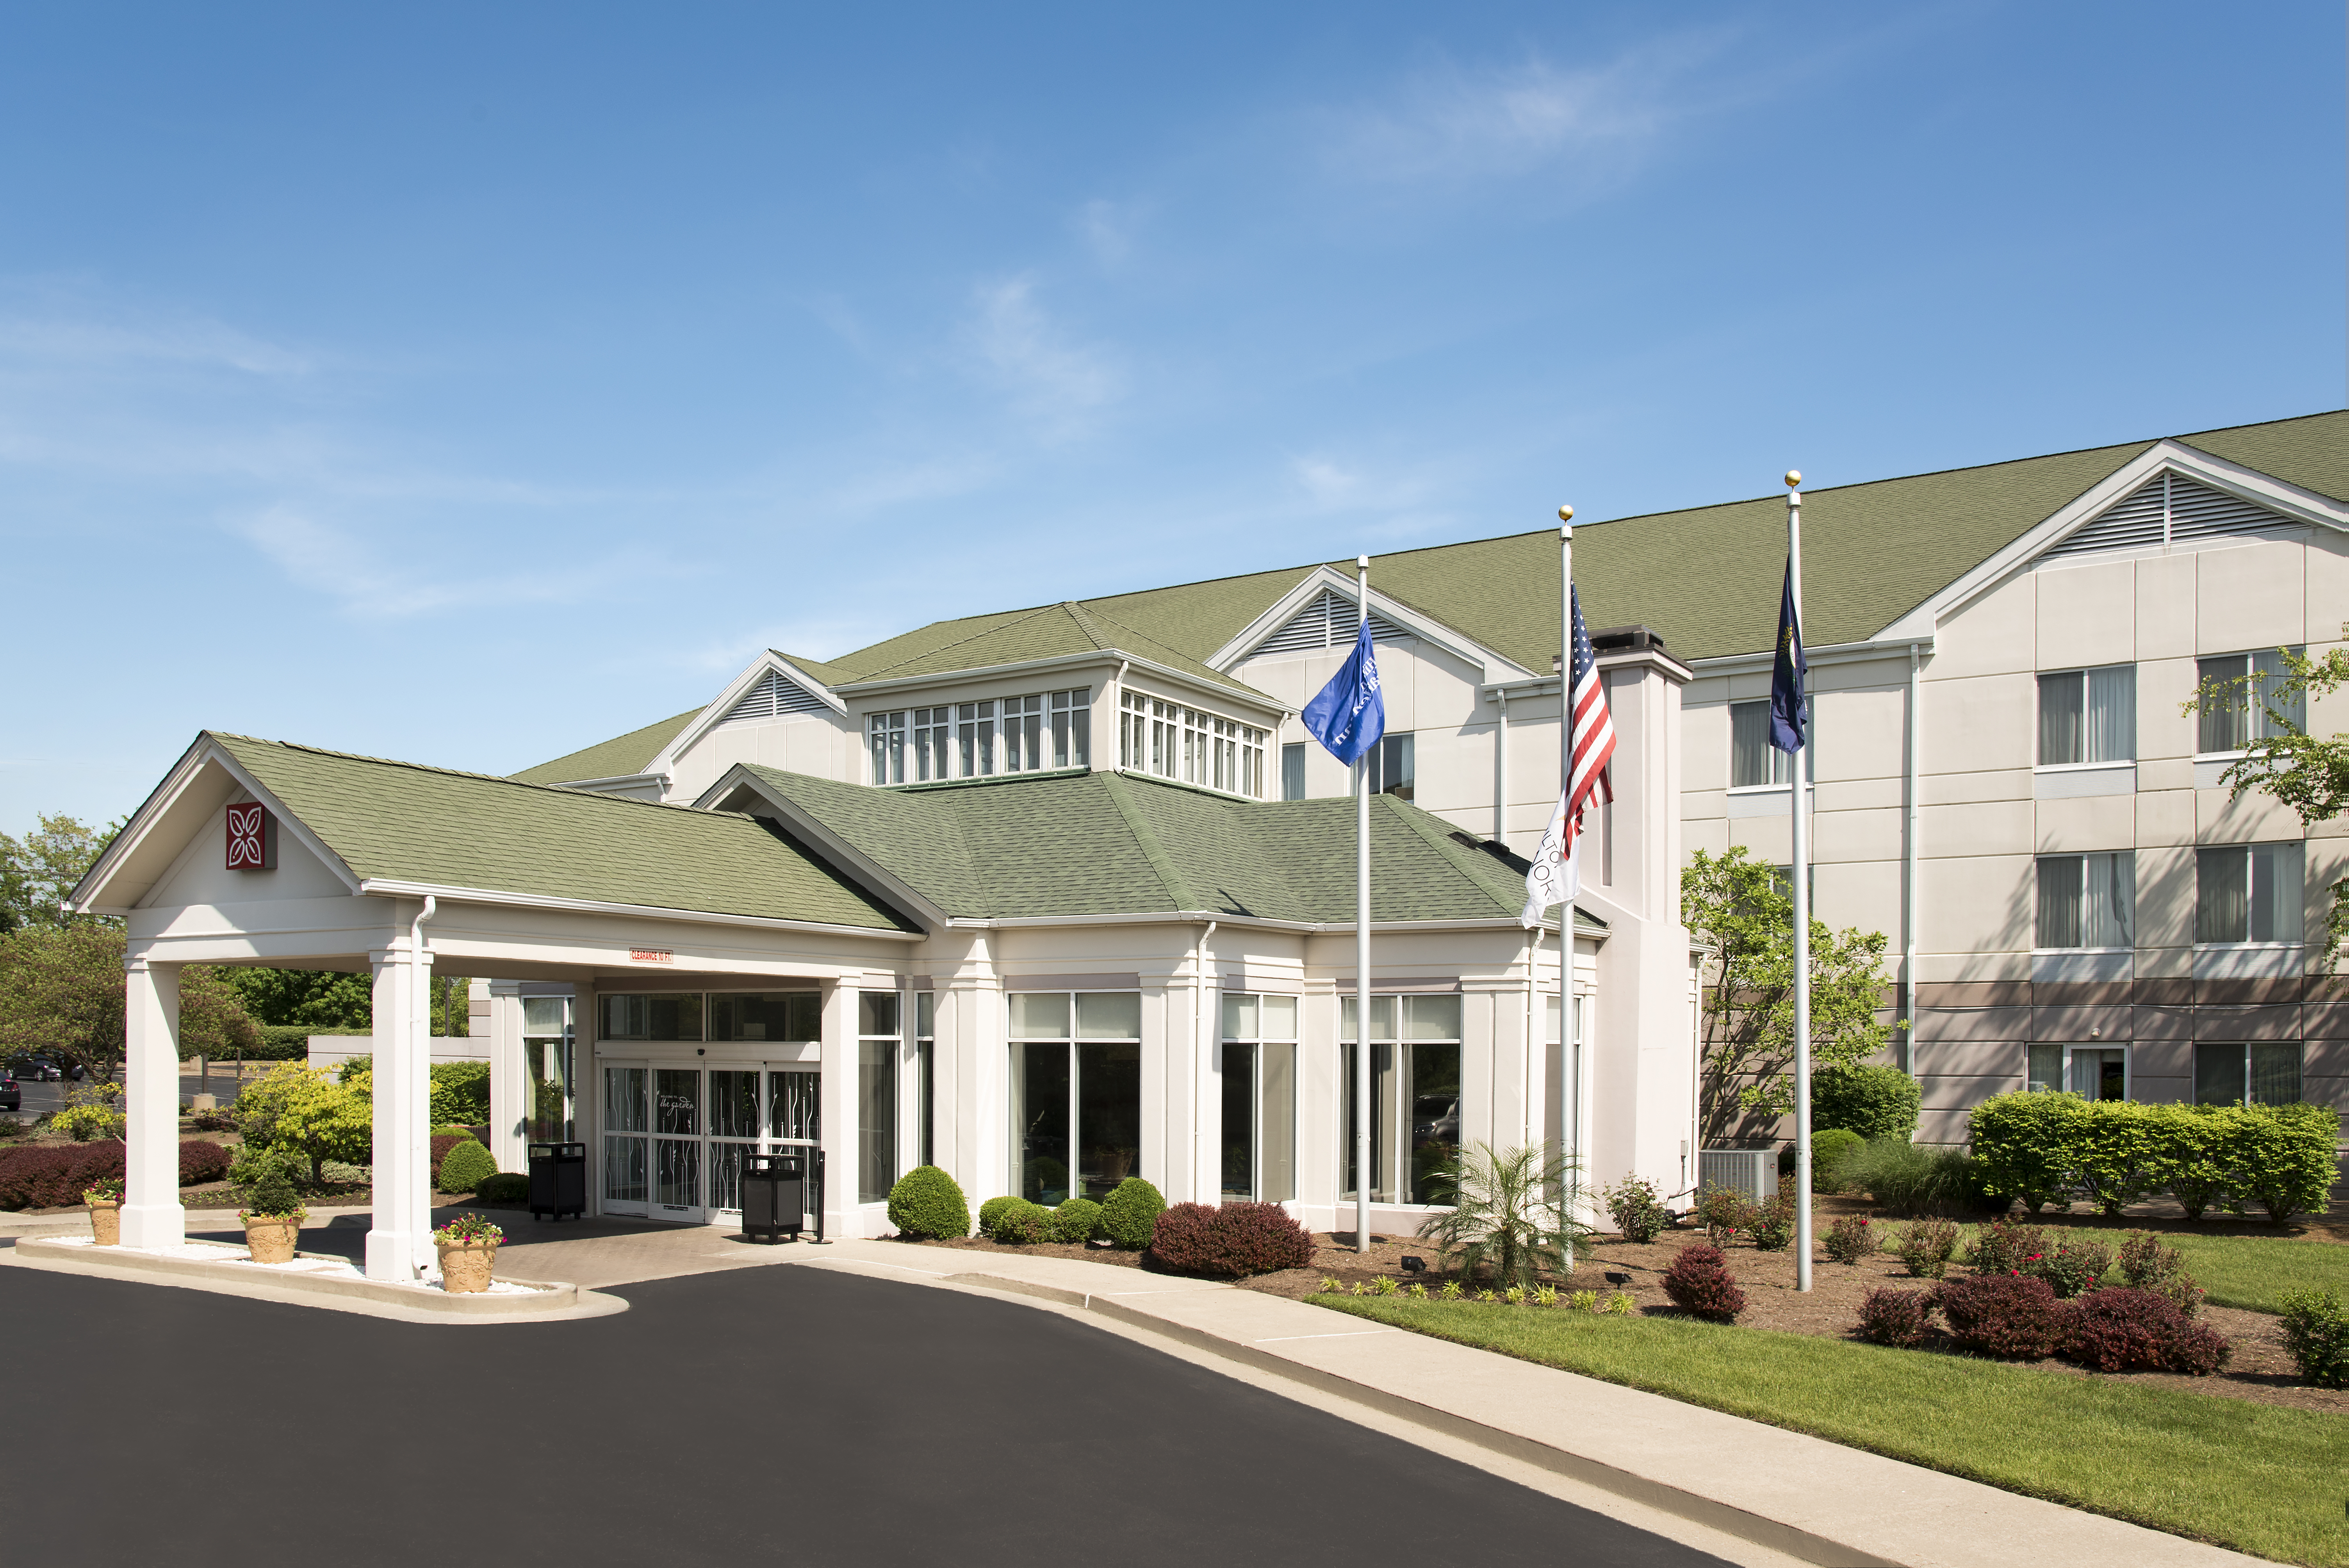 Diagonal View of Hotel Exterior, Entrance Driveway, Landscaping, and Flagpoles